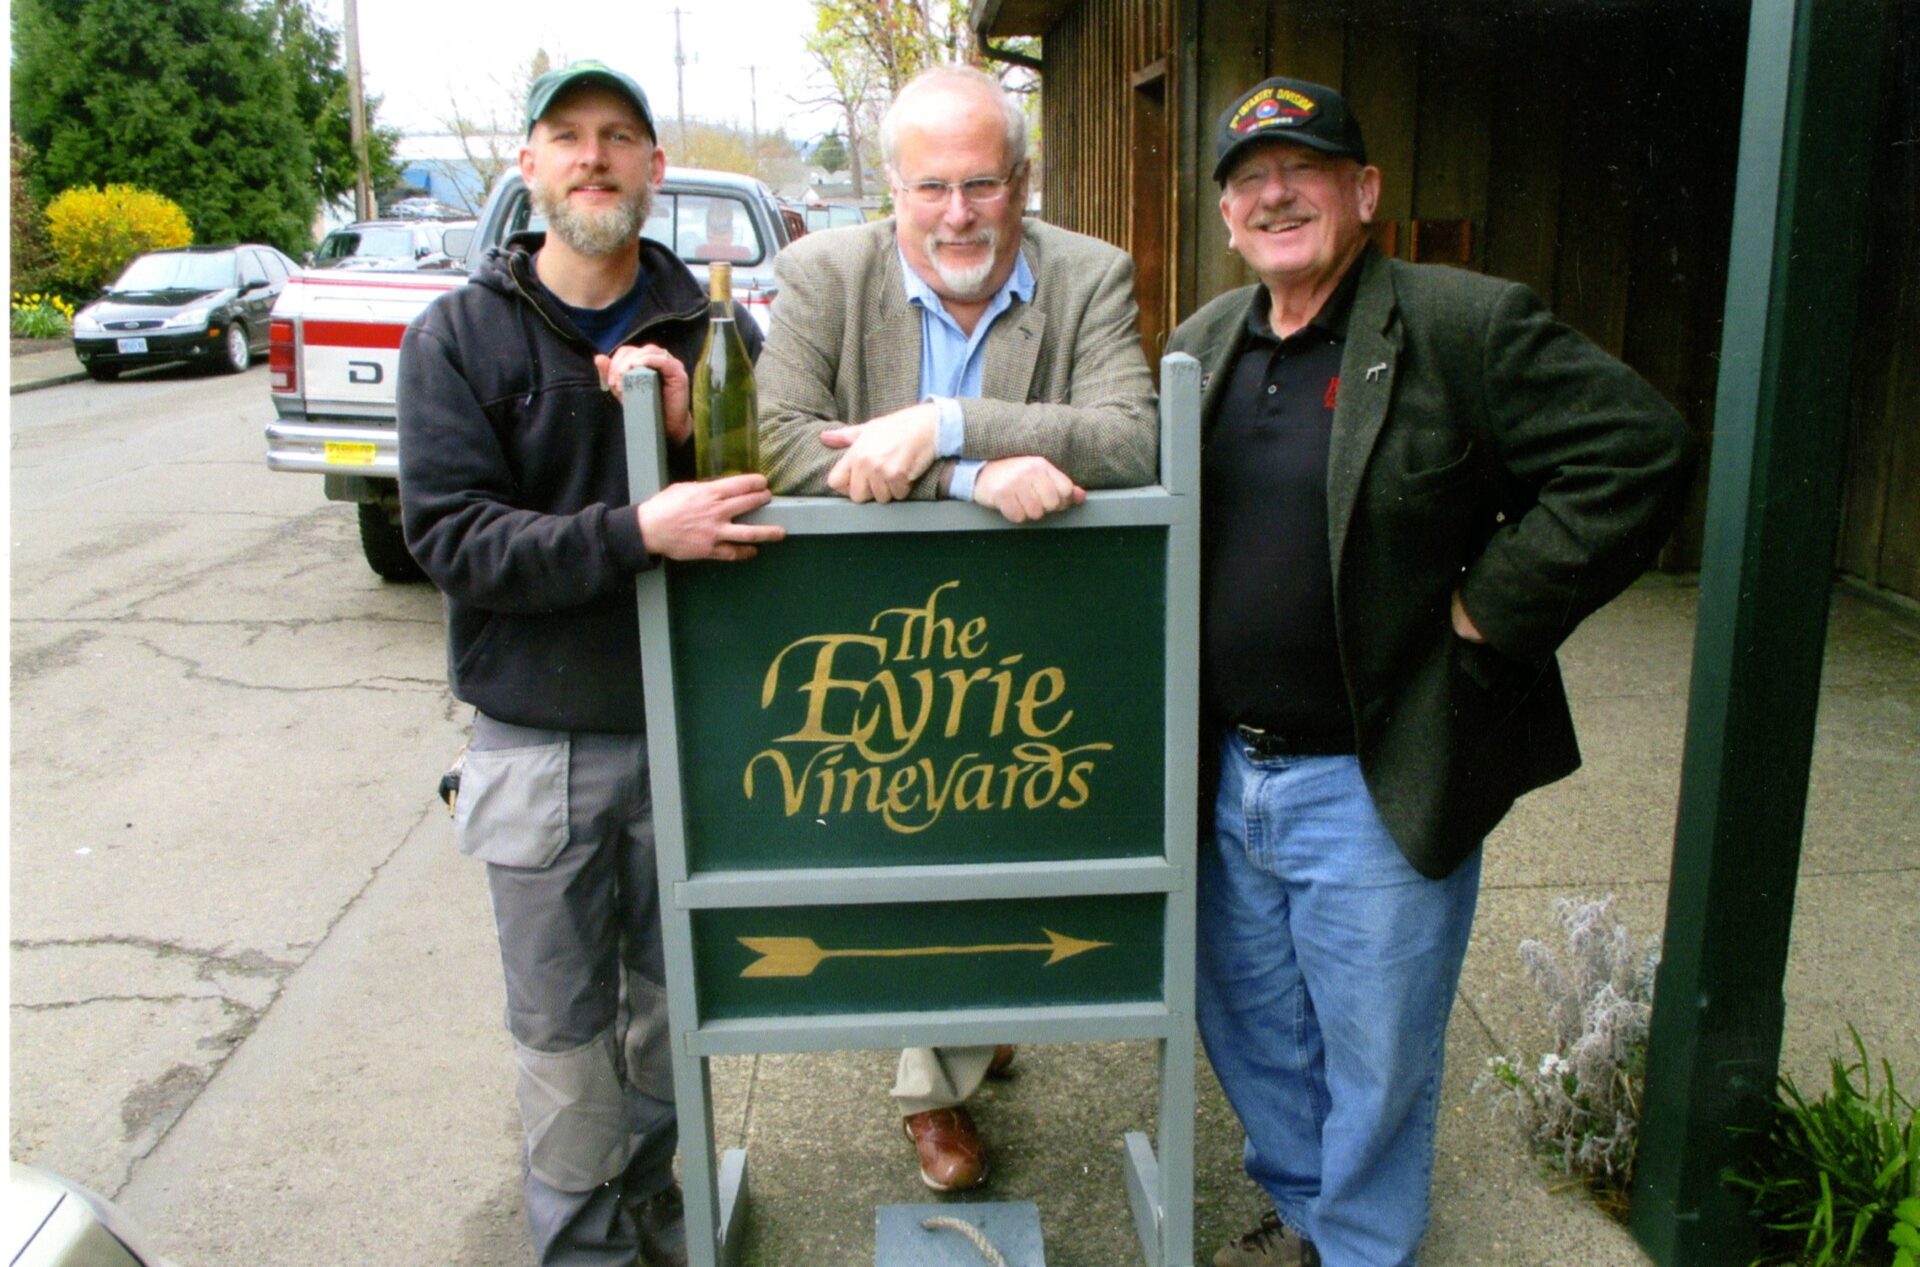 (left to right): Jason Lett, Ken Friedenreich, Doc Wilson at a winery event in McMinnville, Oregon, 2015